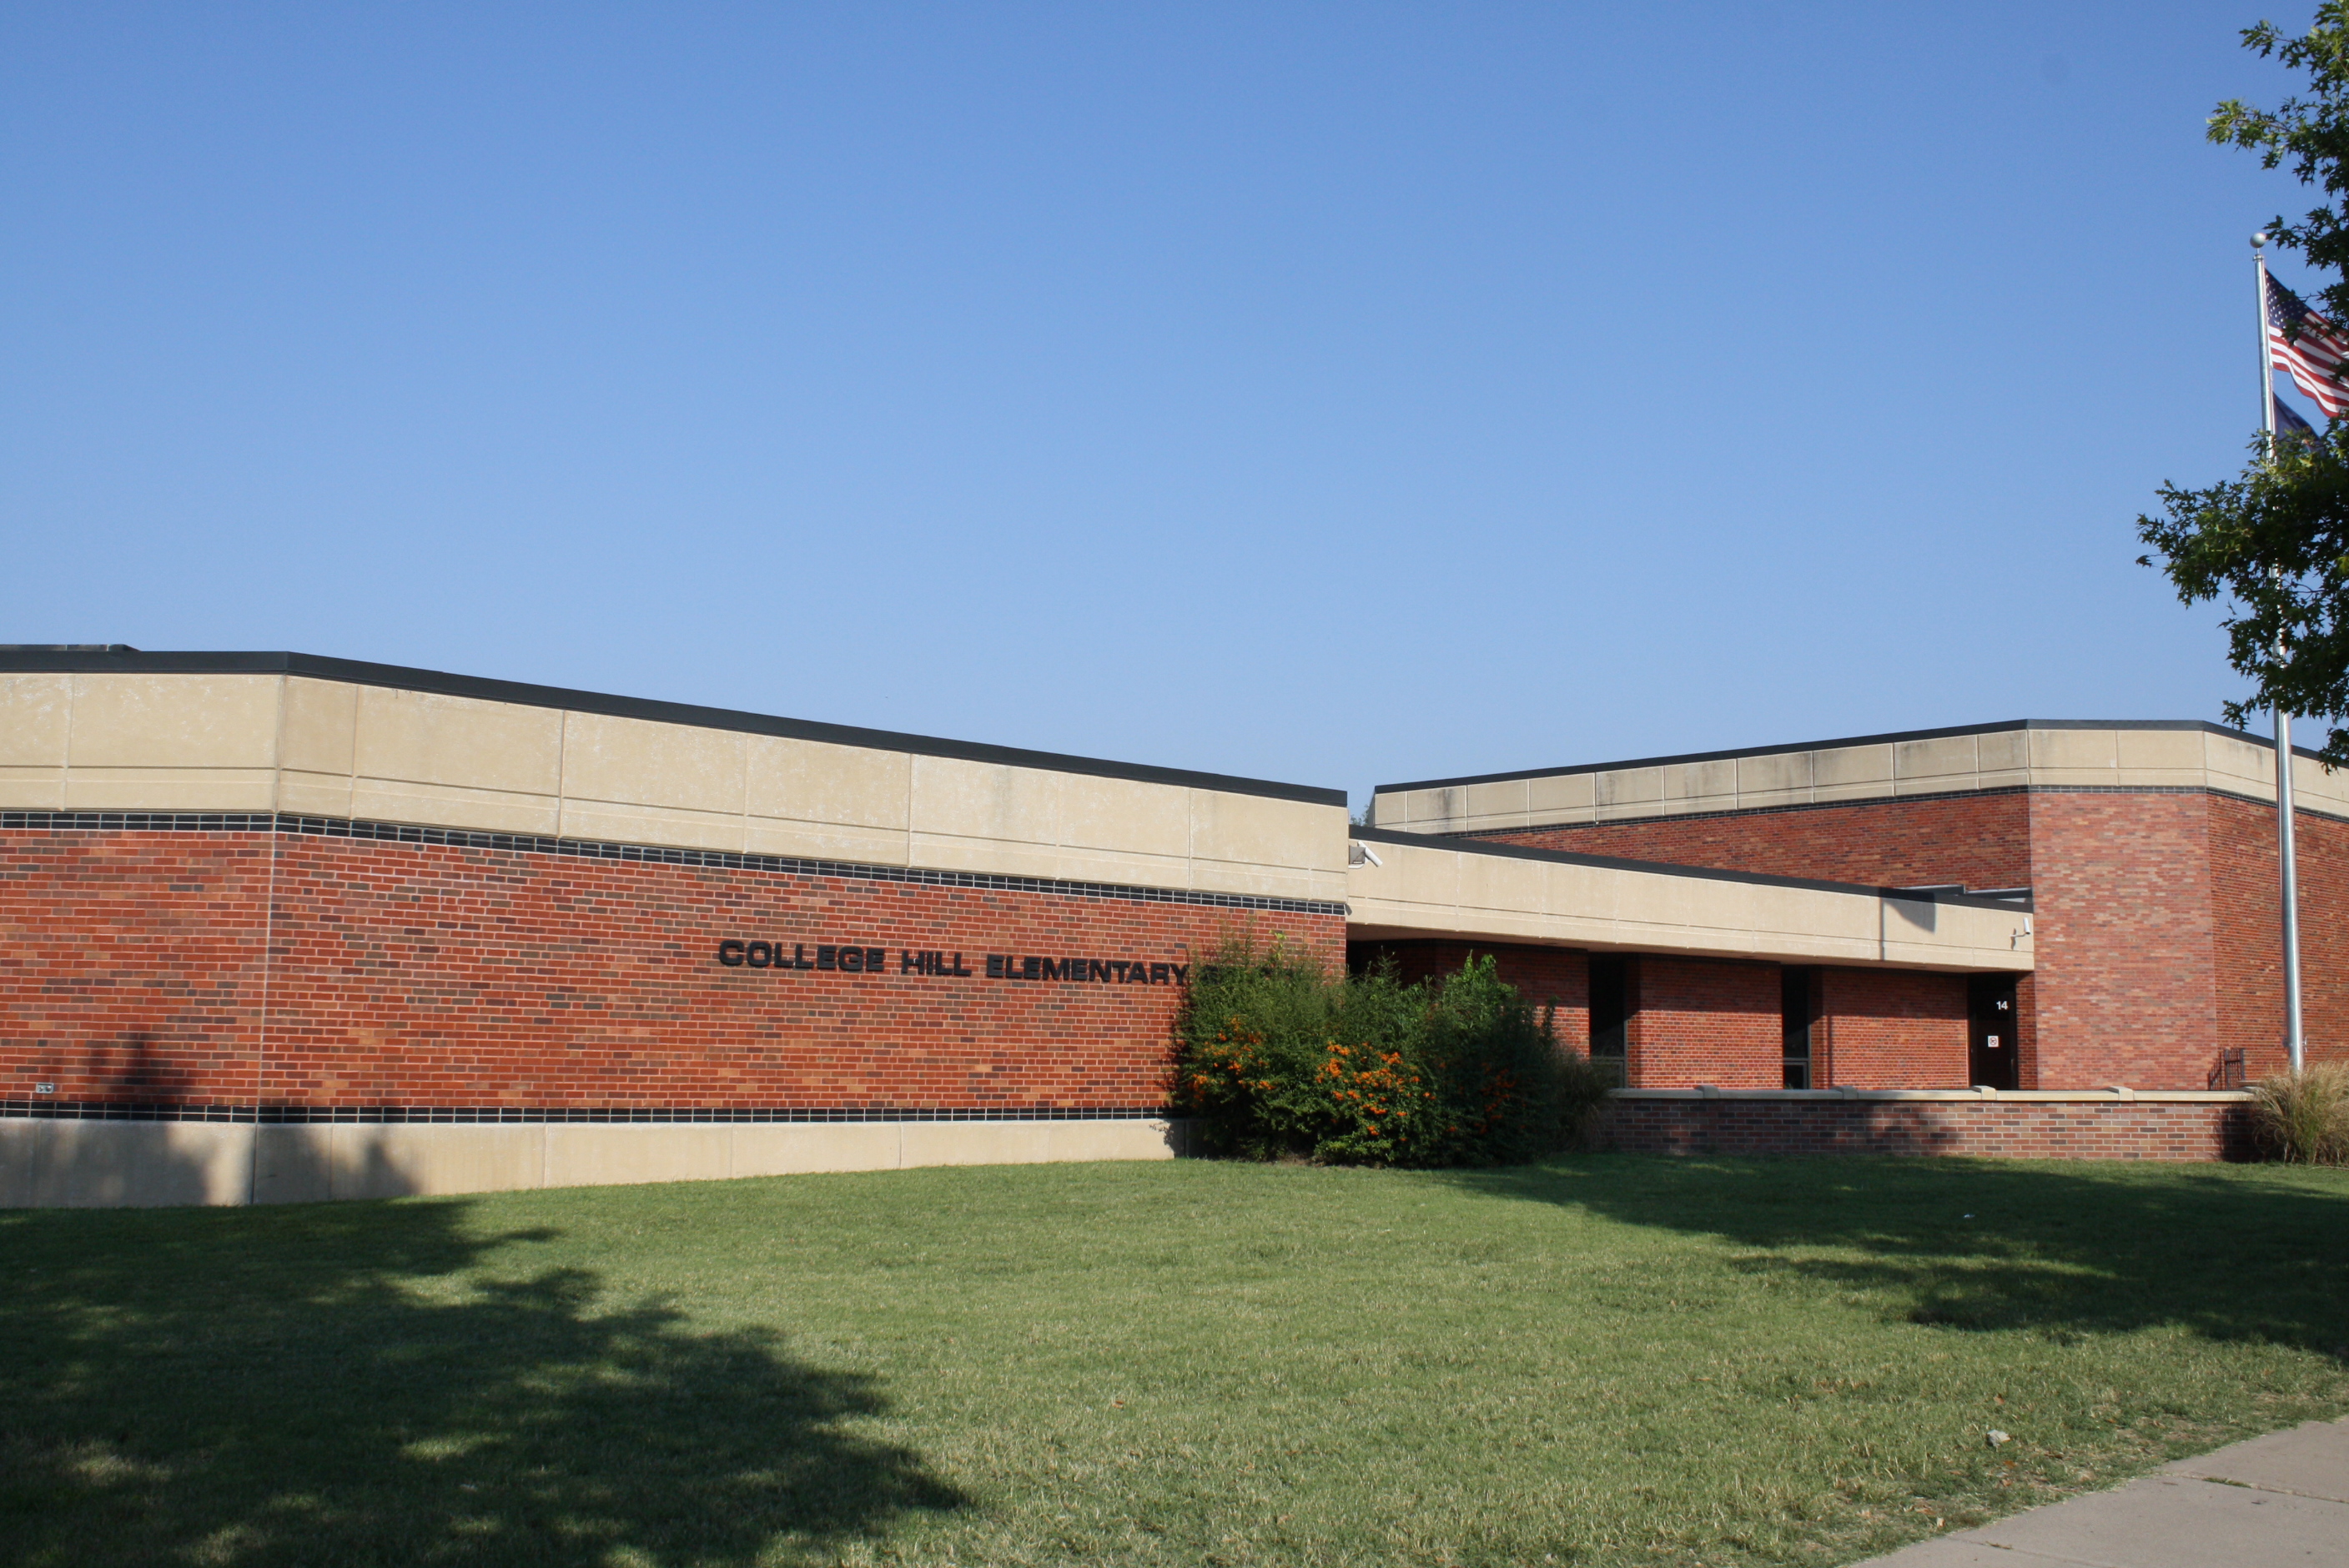 Image of the front of College Hill Elementary School